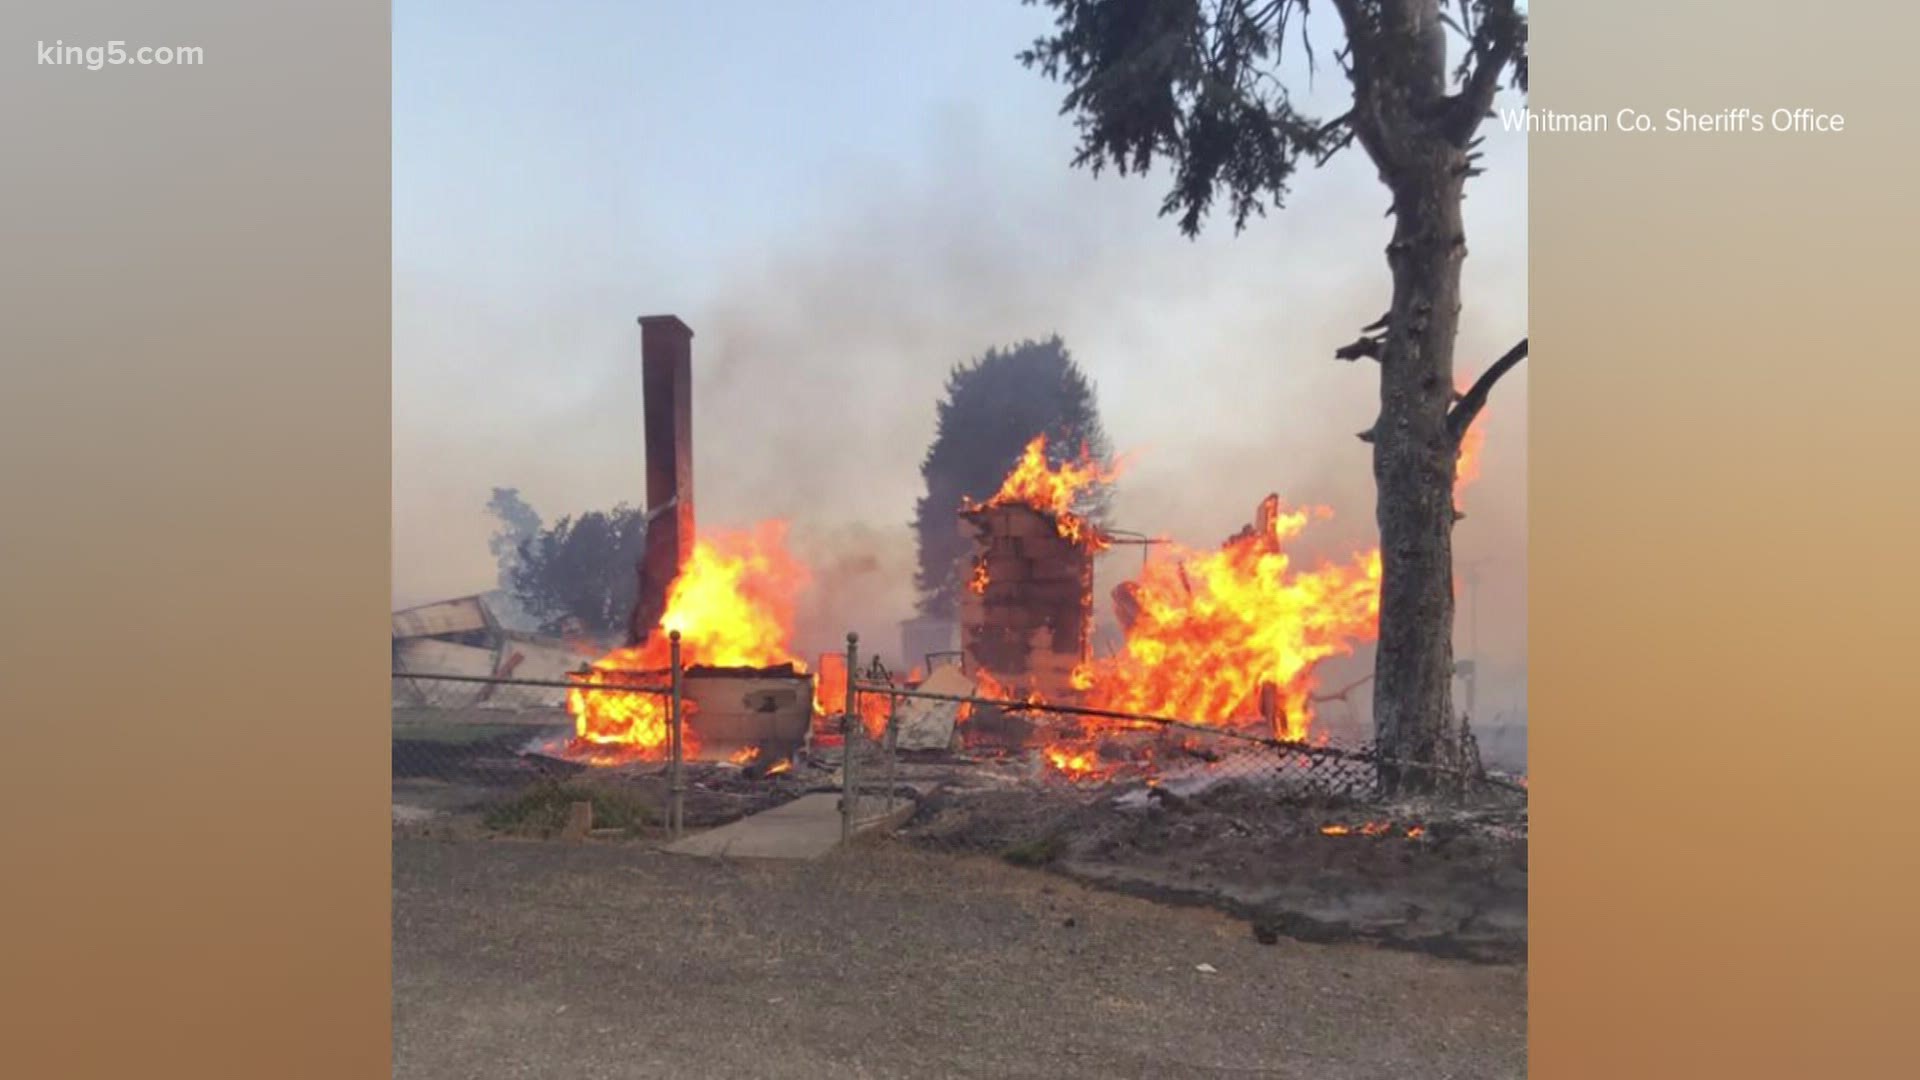 The Cold Springs/Pearl Hill Fire near Omak and Bridgeport has burned 280,000 acres since Sunday night. Wildfires statewide have burned 330,00 acres.